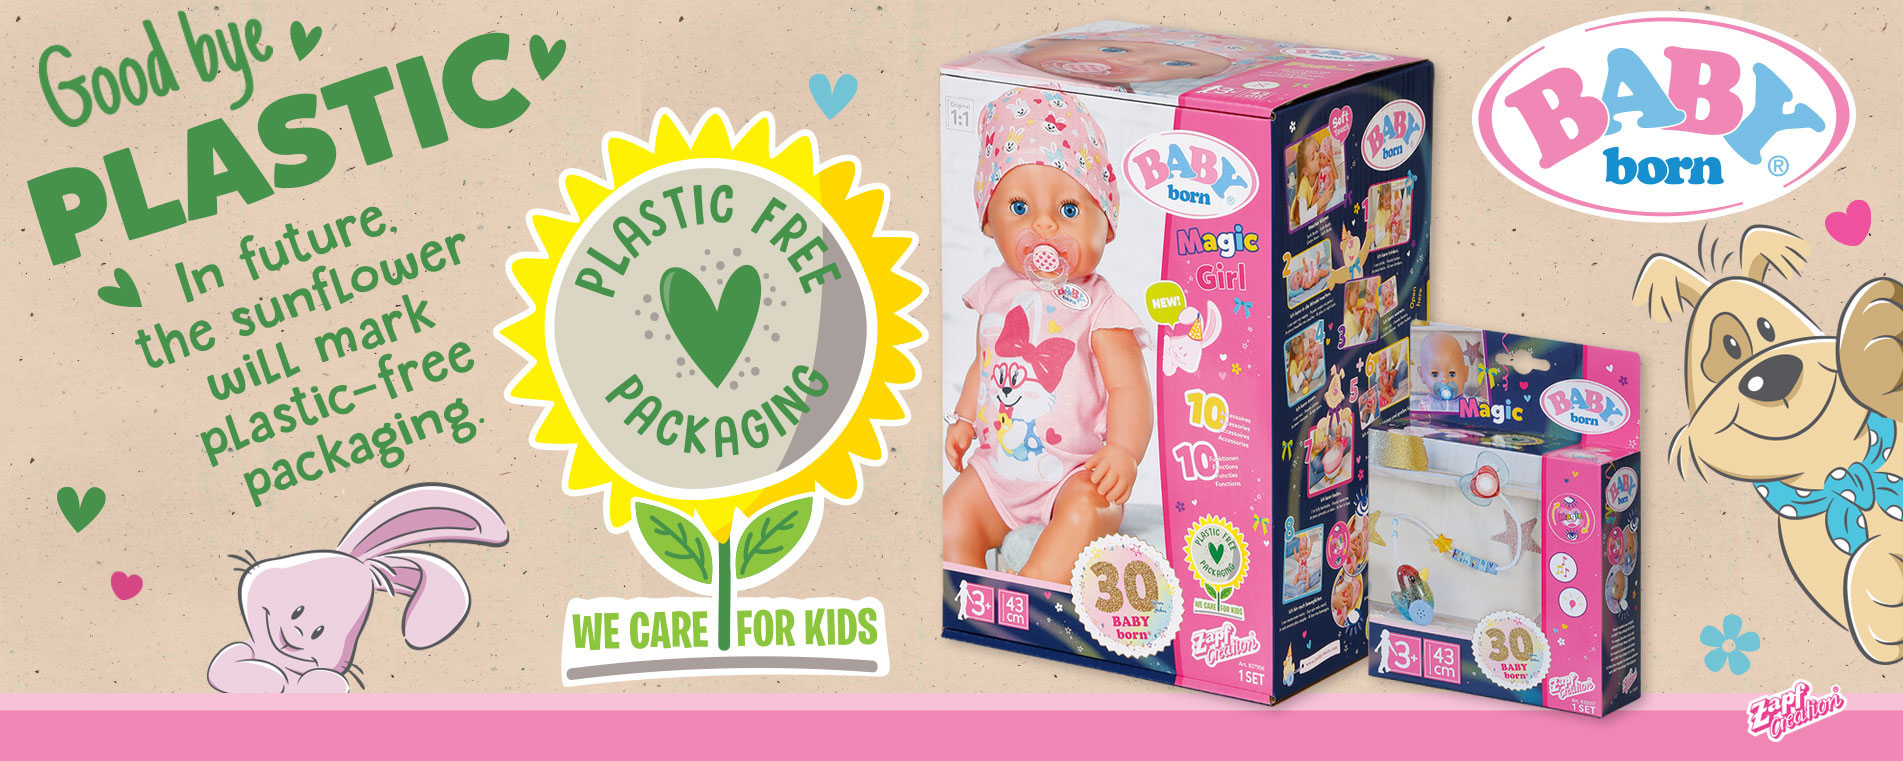 Baby Born Plastic Free Packaging